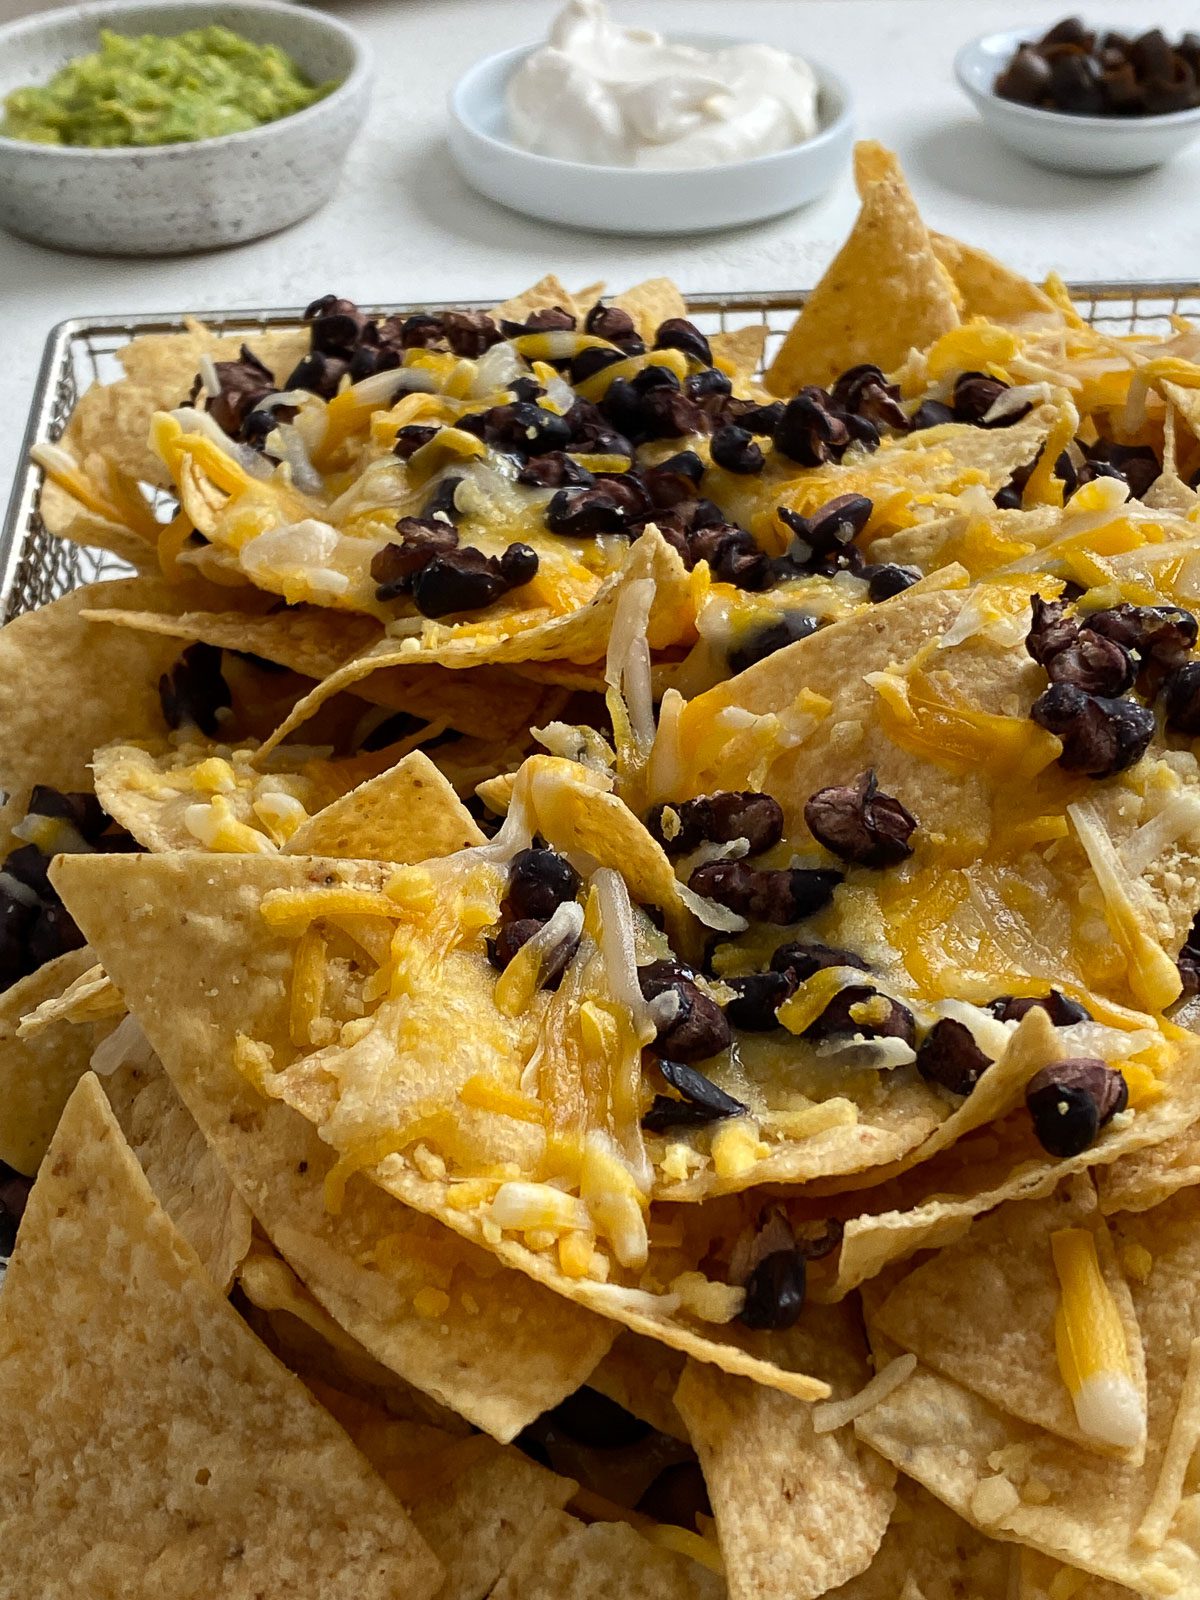 Vegan Air Fryer Nachos on air fryer tray against white surface prior to being air-fried